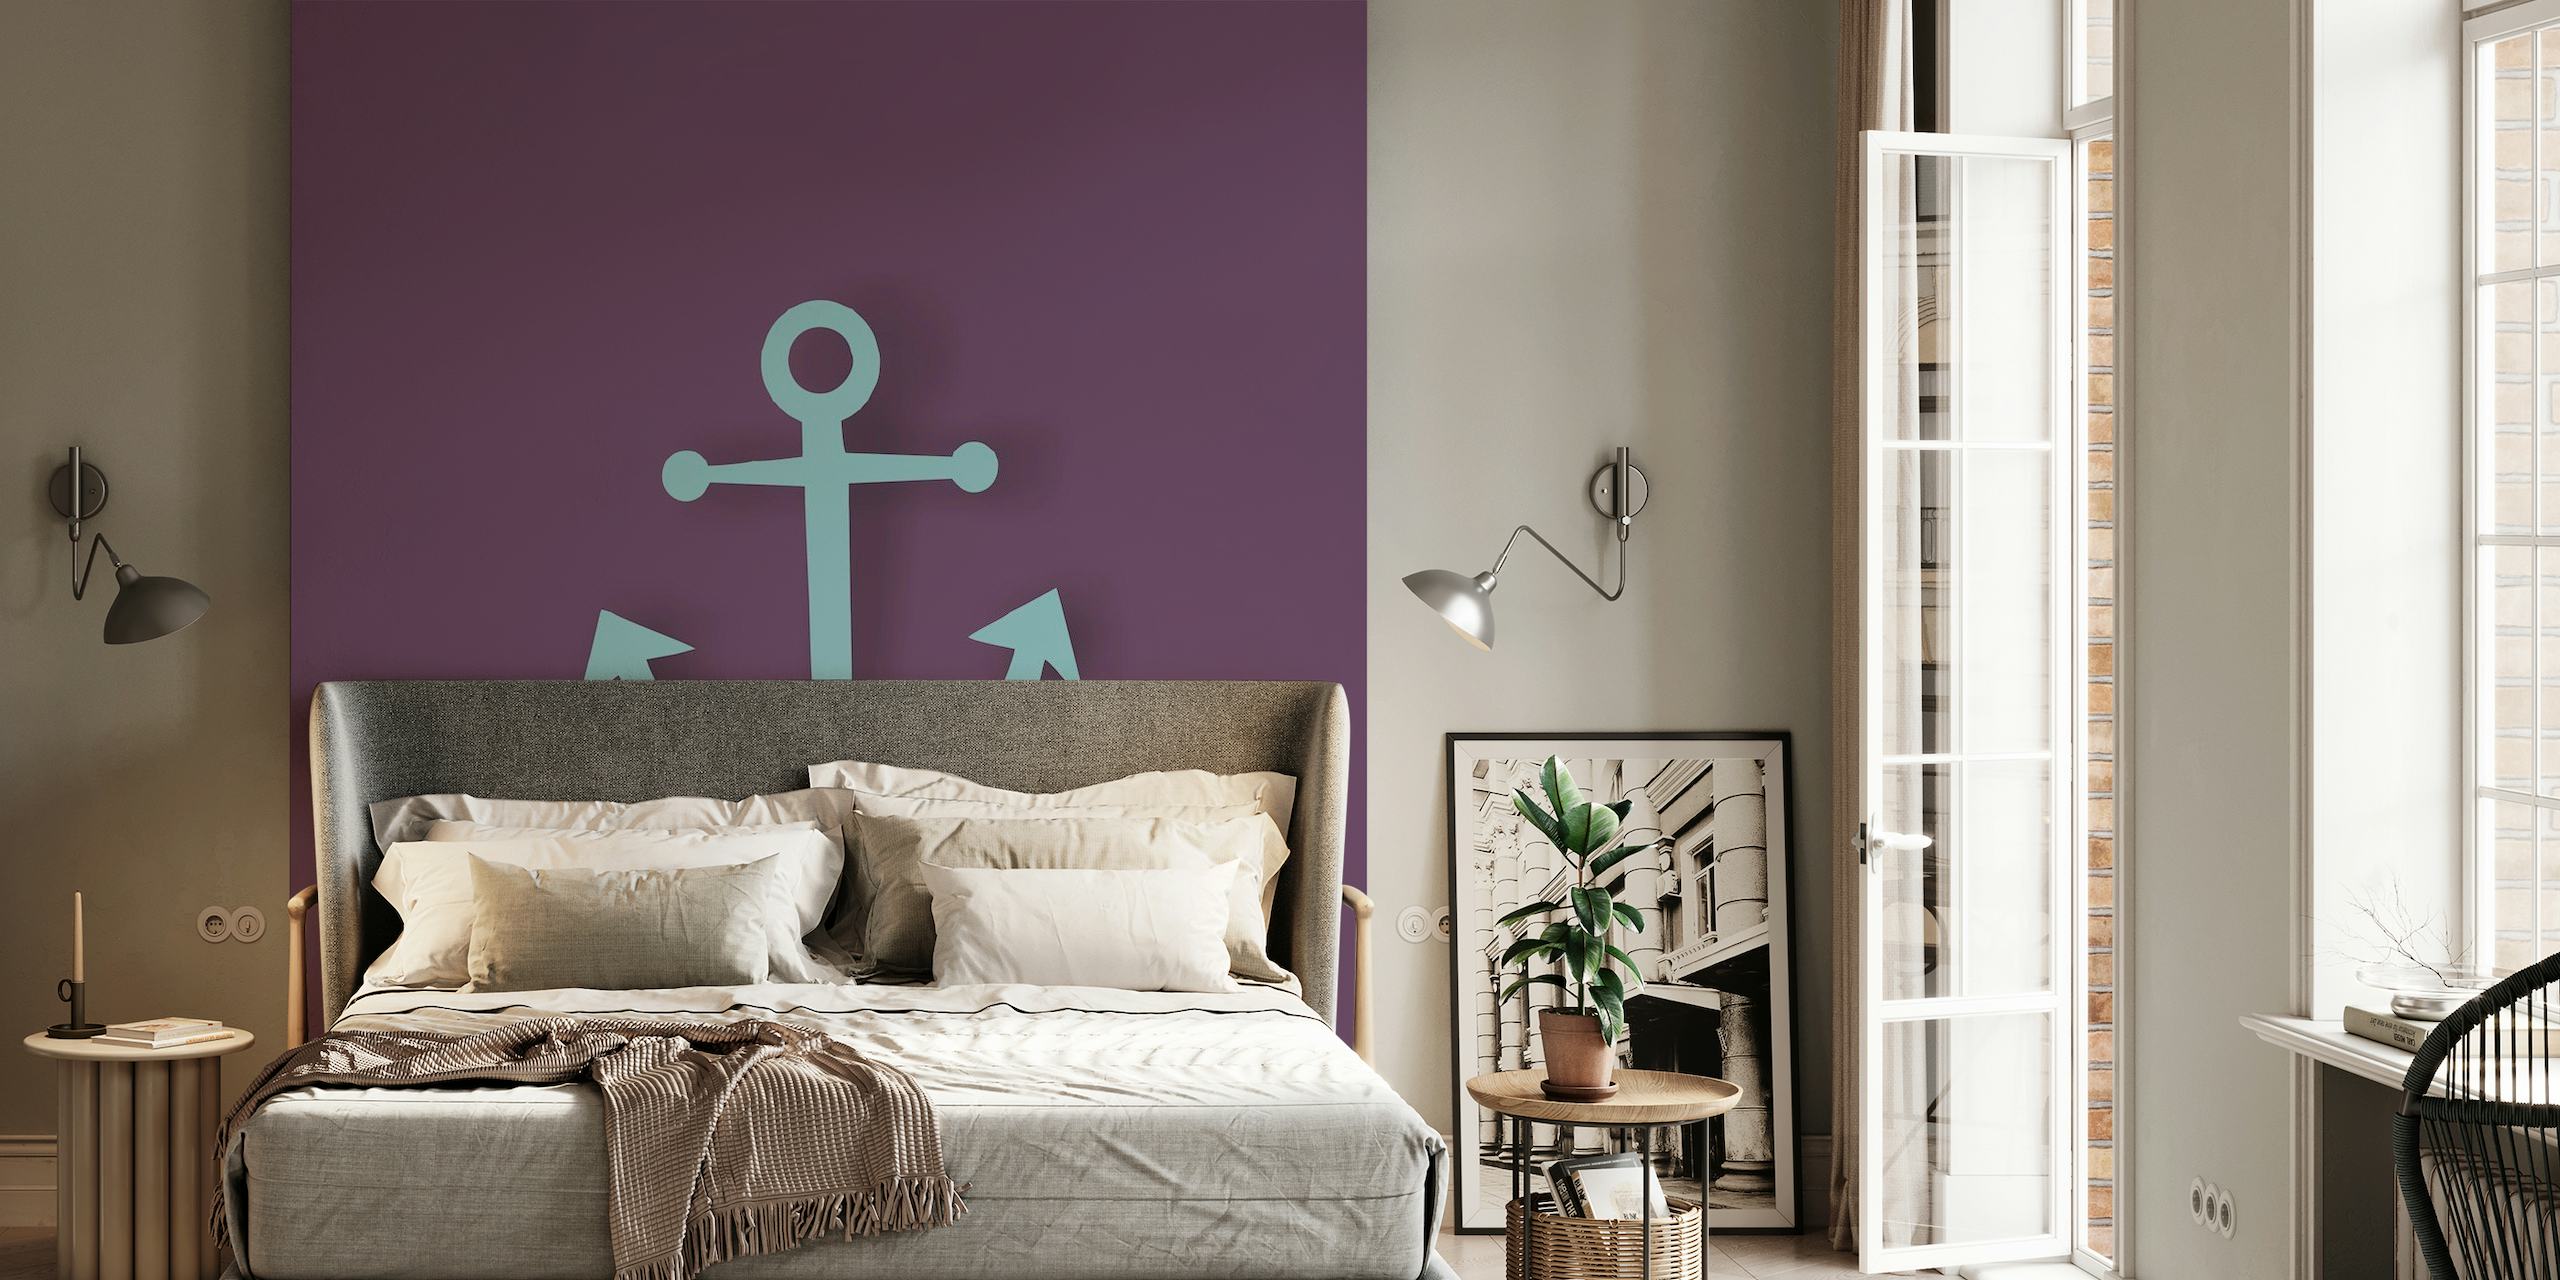 Violet purple background with a central teal blue anchor wall mural